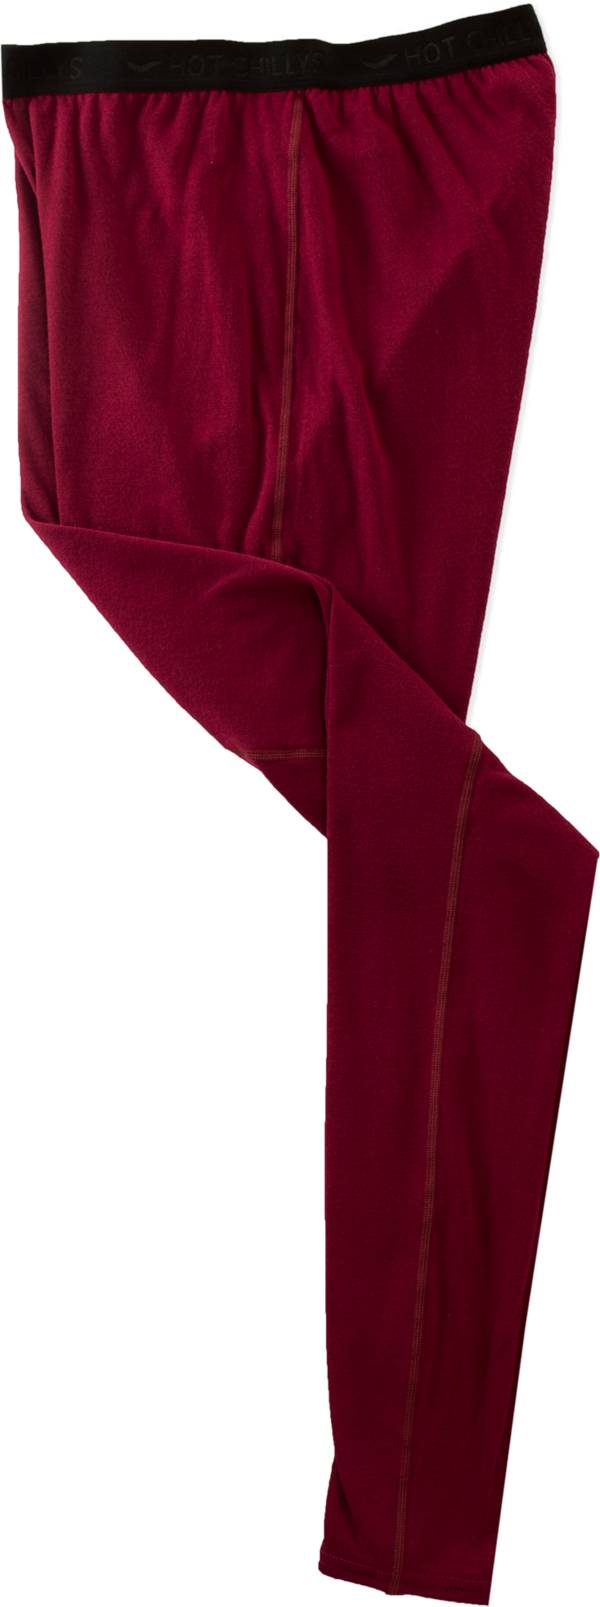 Hot Chillys Women's Pepper Bi-Ply Bottoms product image